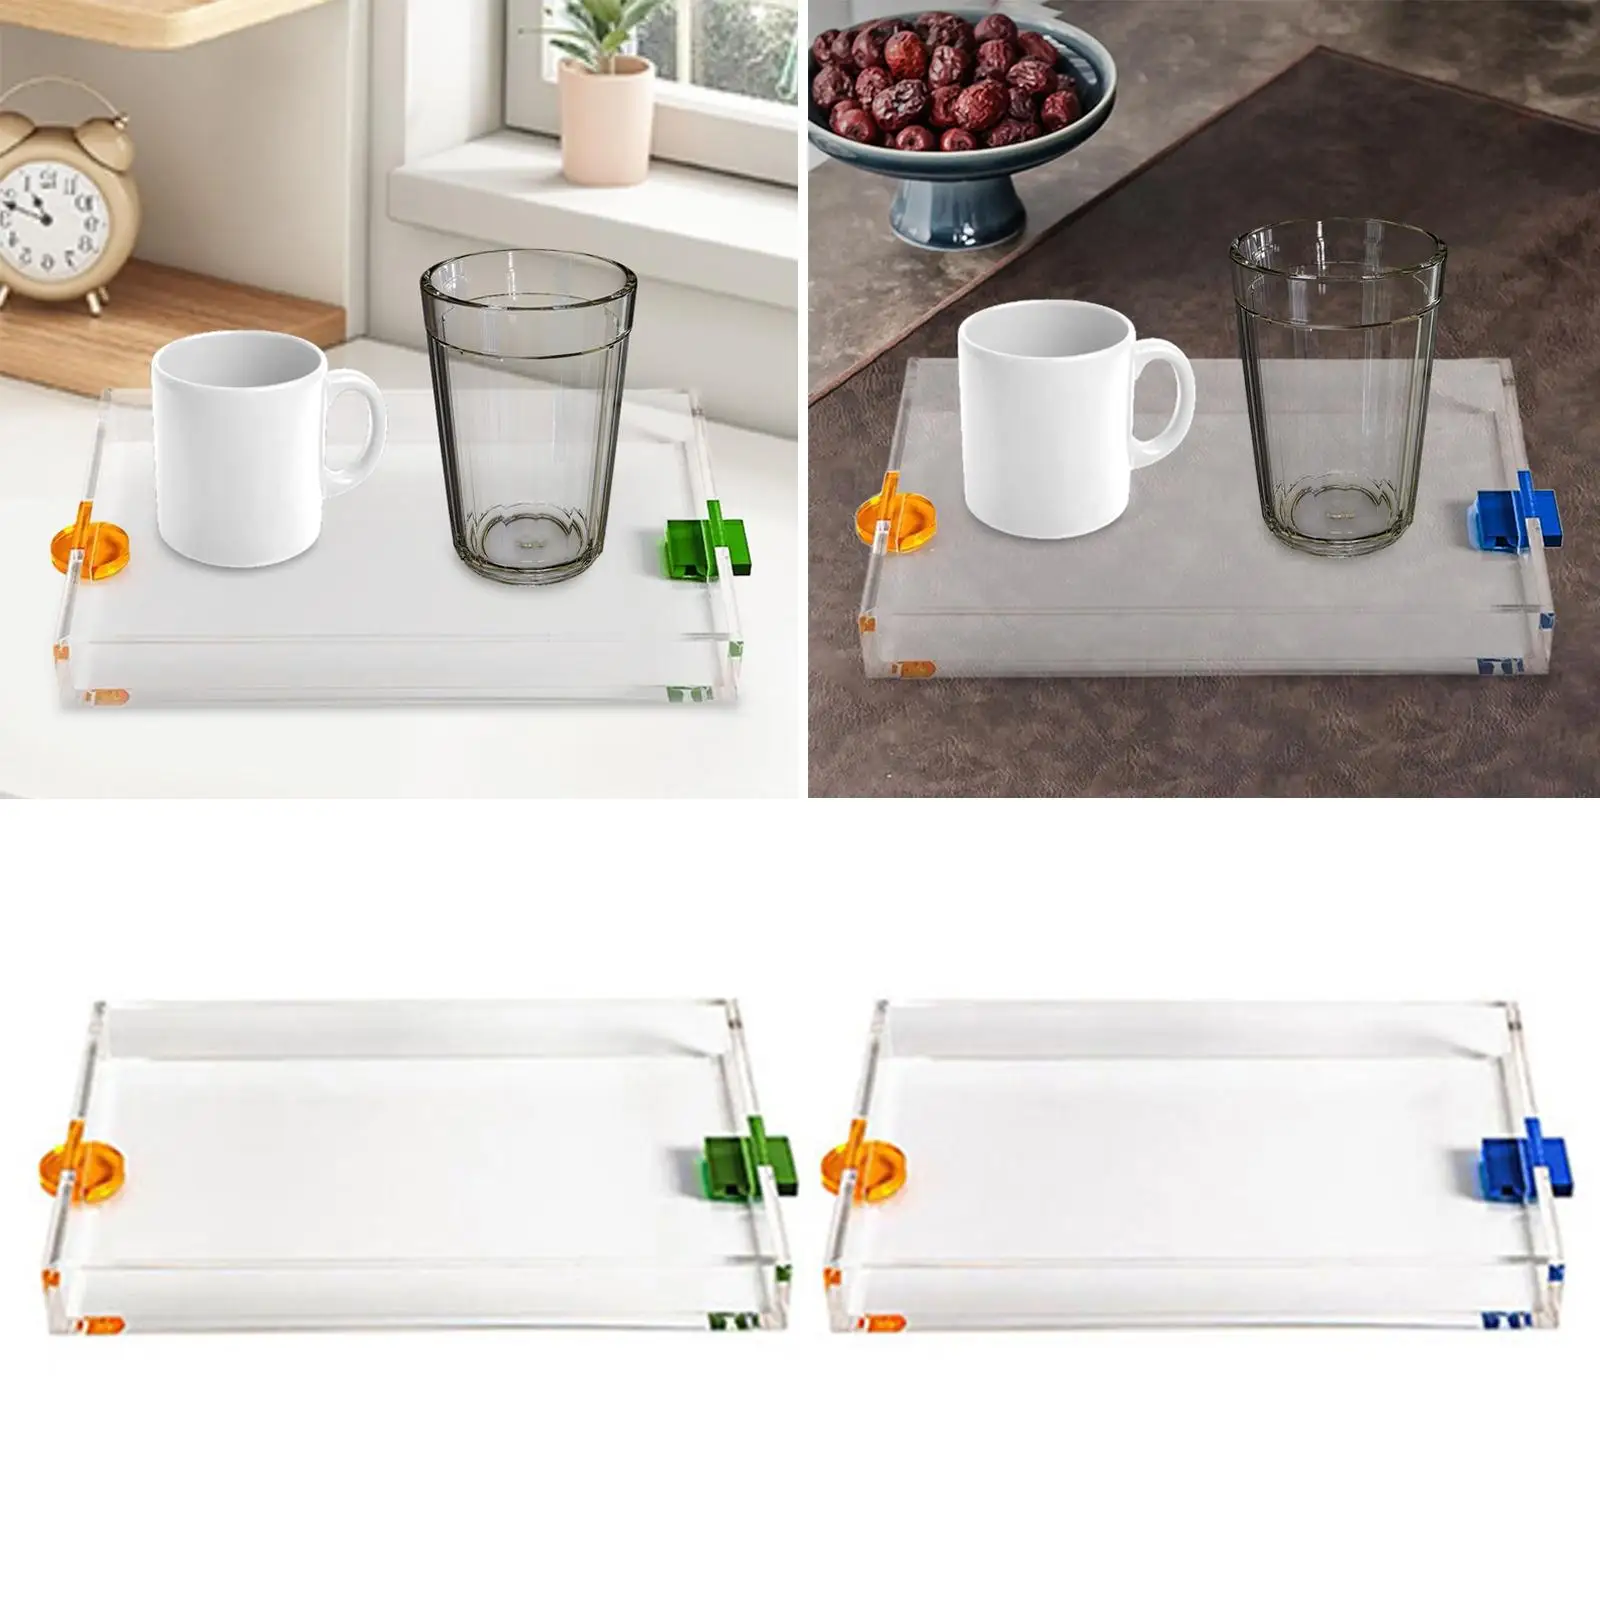 Clear Serving Tray Food Trays Stylish Easy to Clean Practical for Desktop, Countertop Ottoman Tray Versatile Rectangular